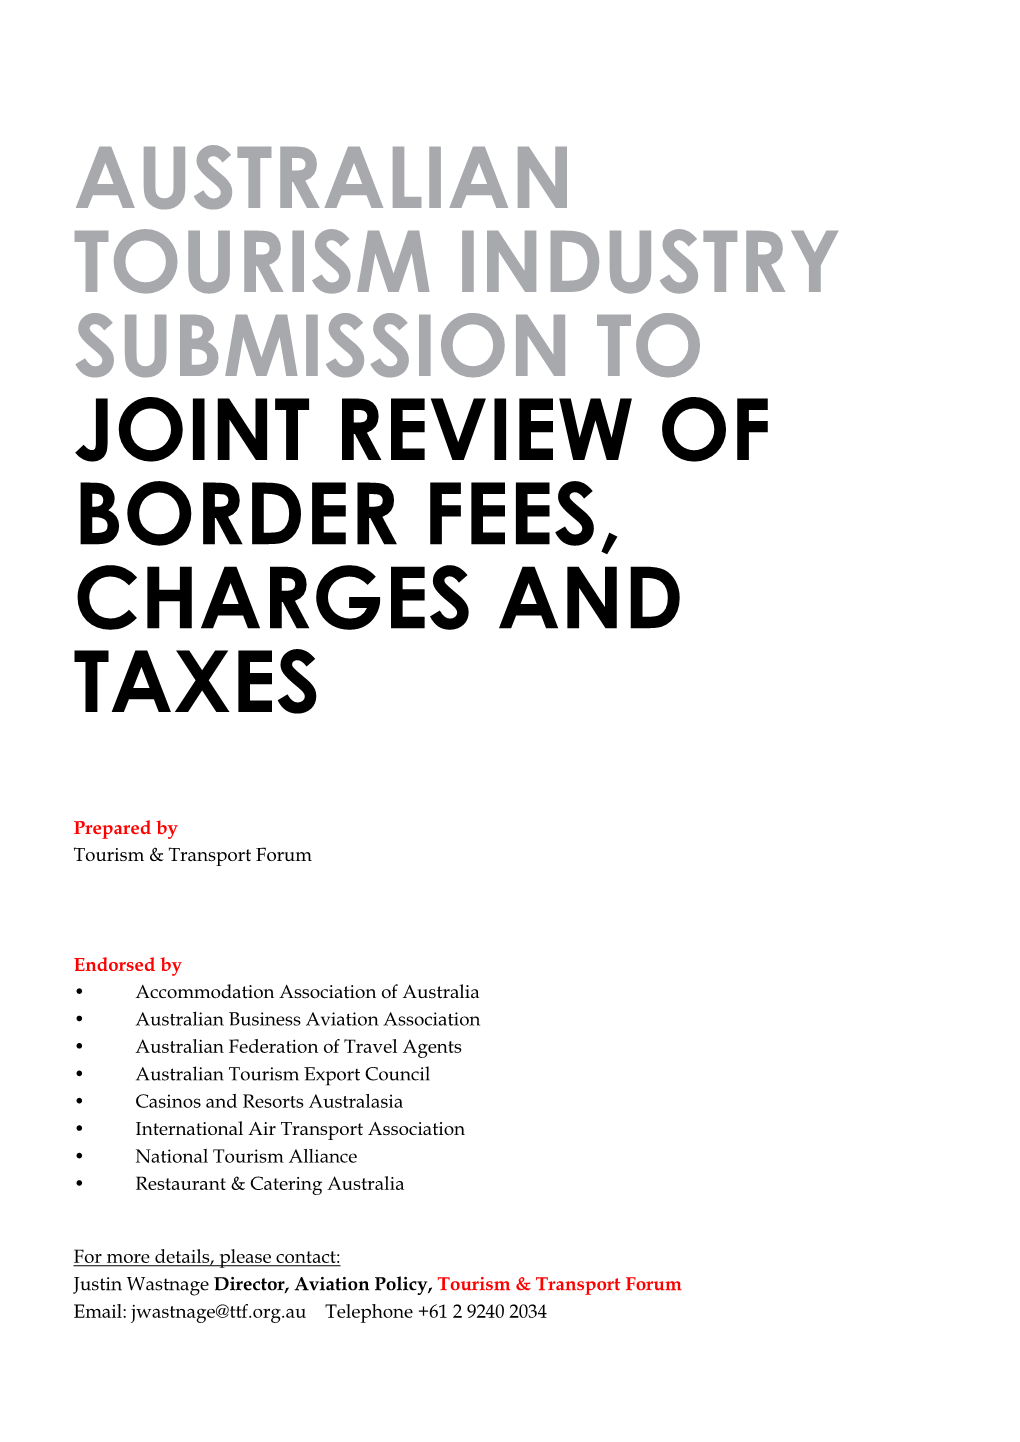 Joint Review of Border Fees, Charges and Taxes